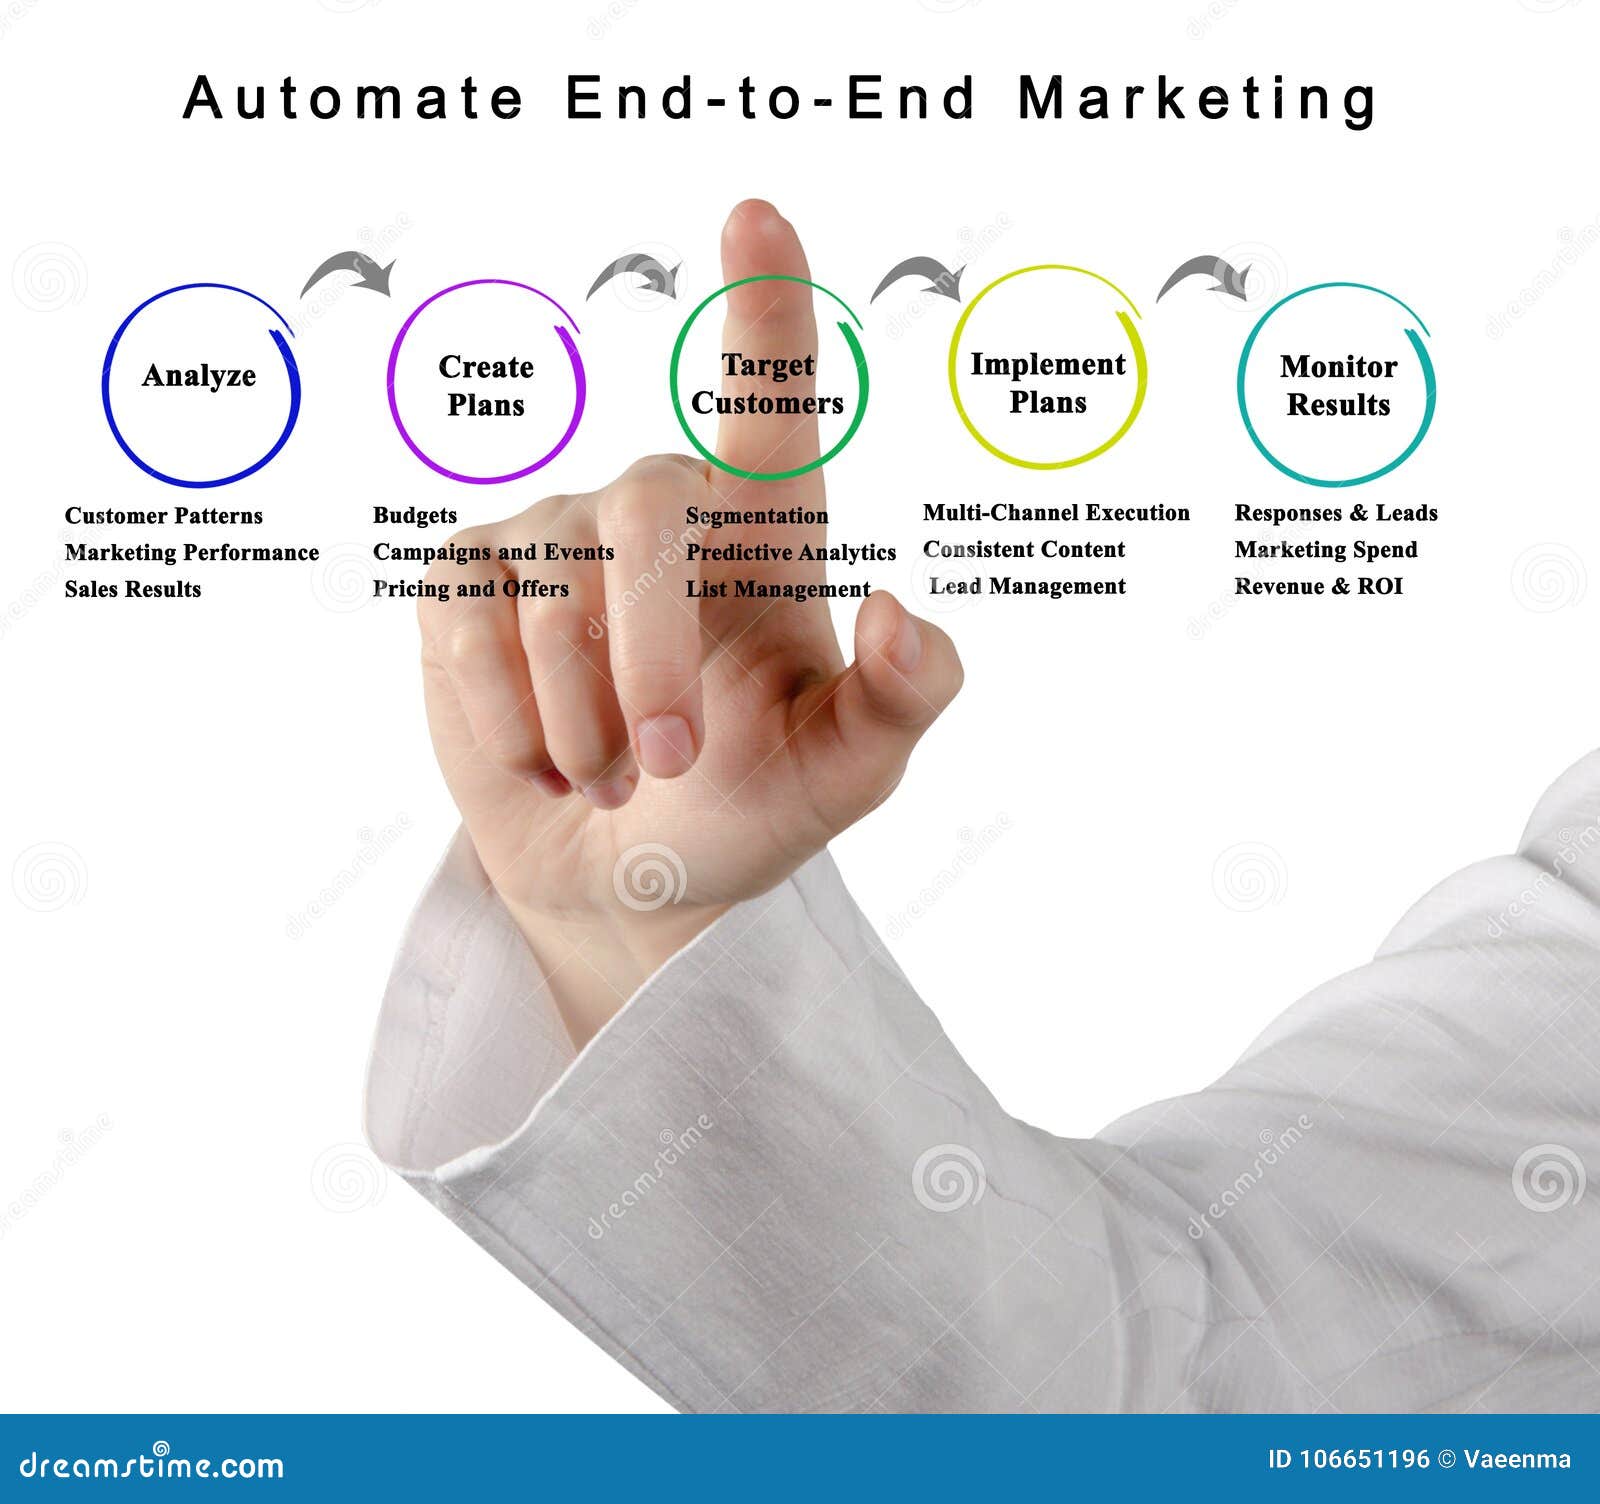 automate end-to-end marketing